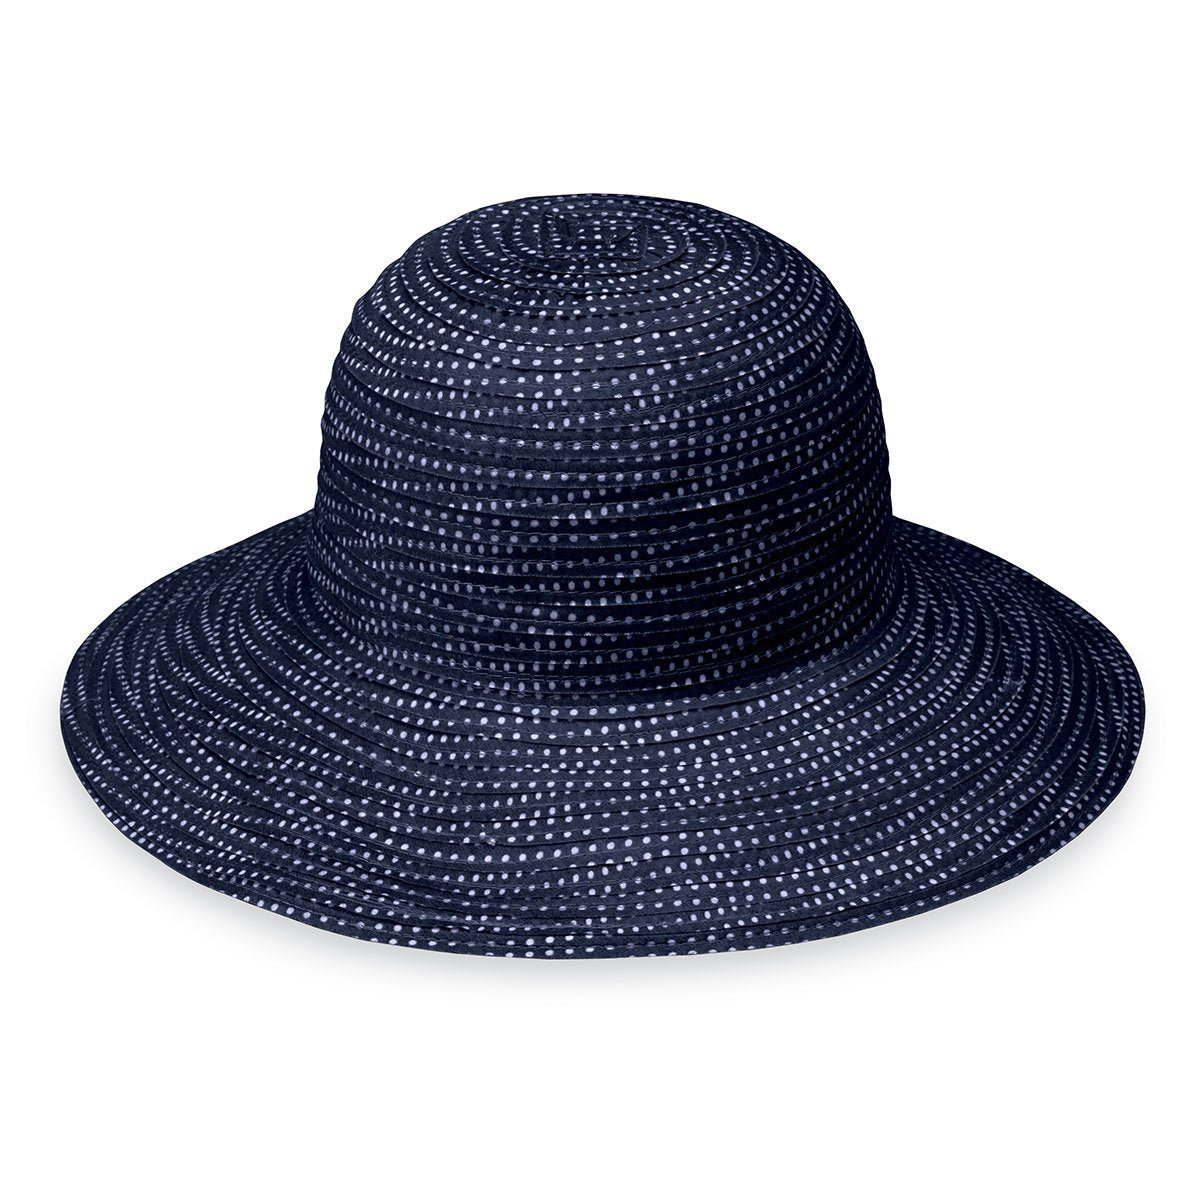 Featuring Women's Packable Crown Style Petite Scrunchie UPF Sun Hat in Navy White from Wallaroo